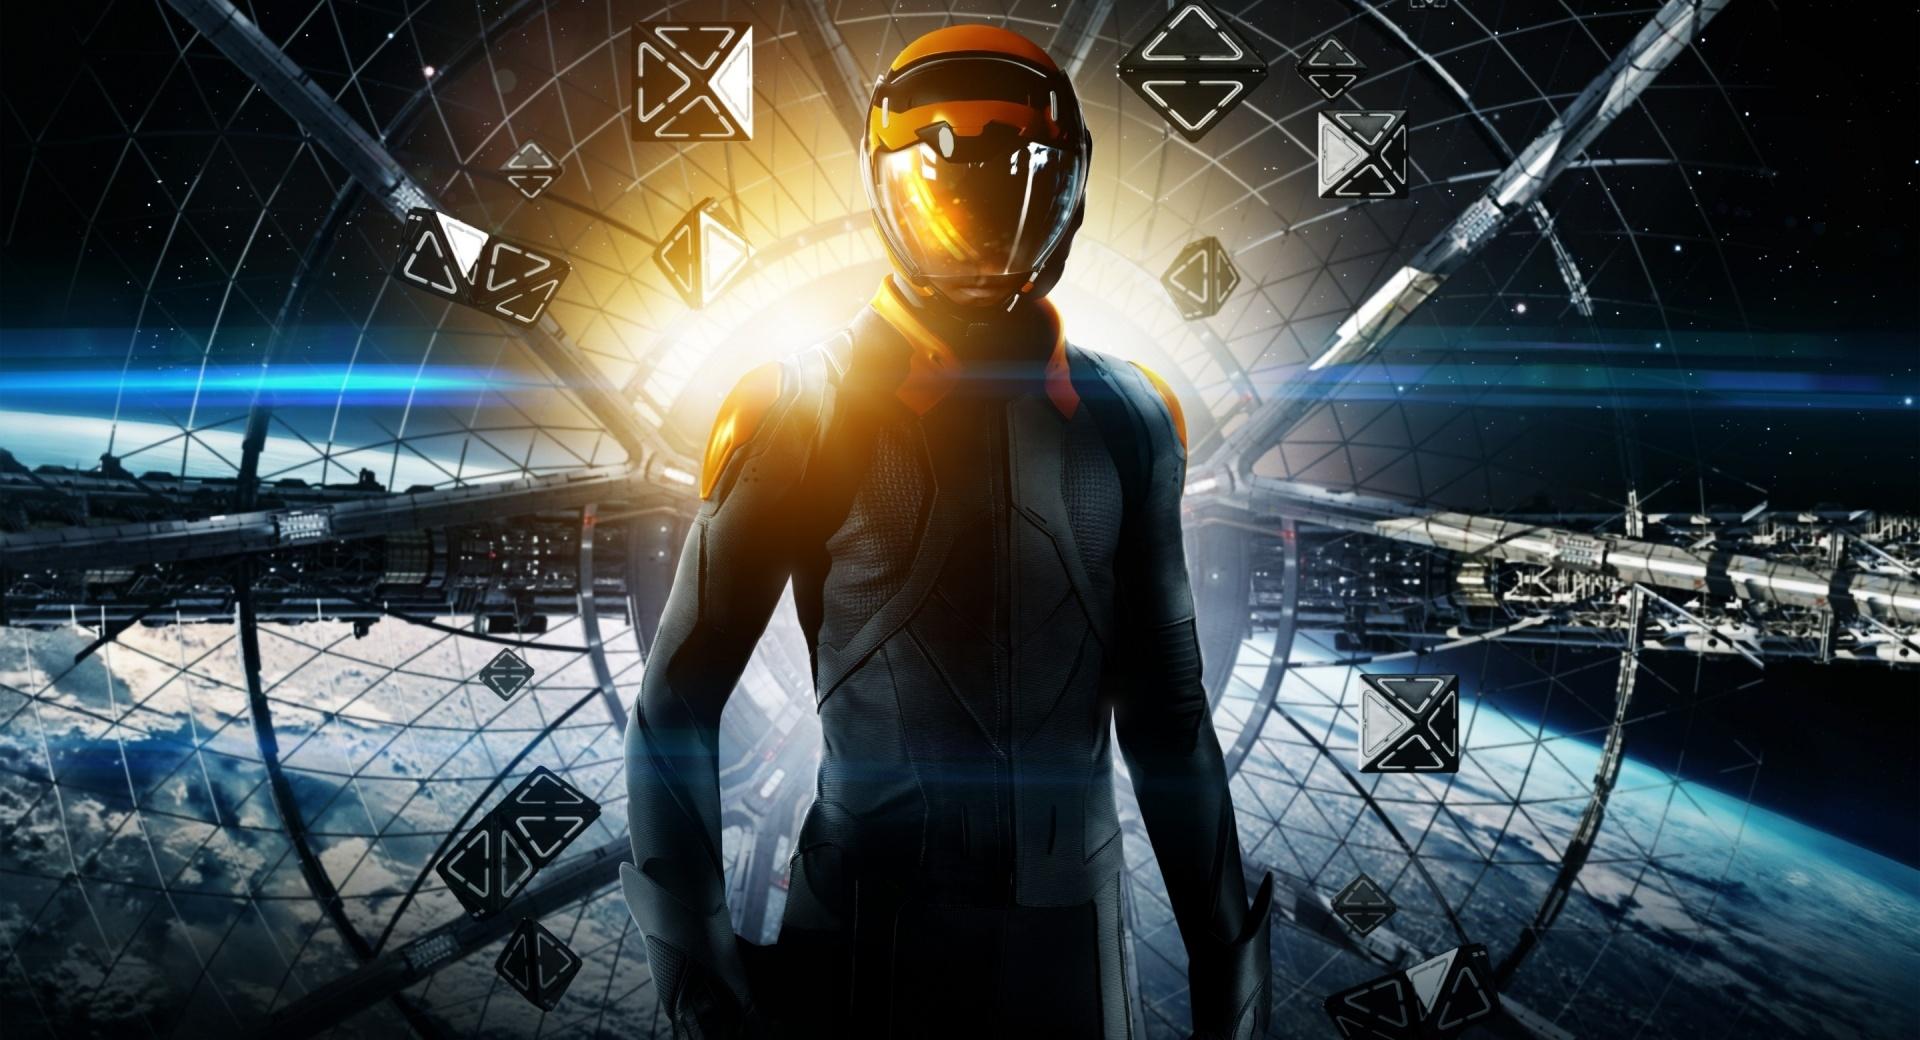 Enders Game 2013 Sci Fi Movie wallpapers HD quality